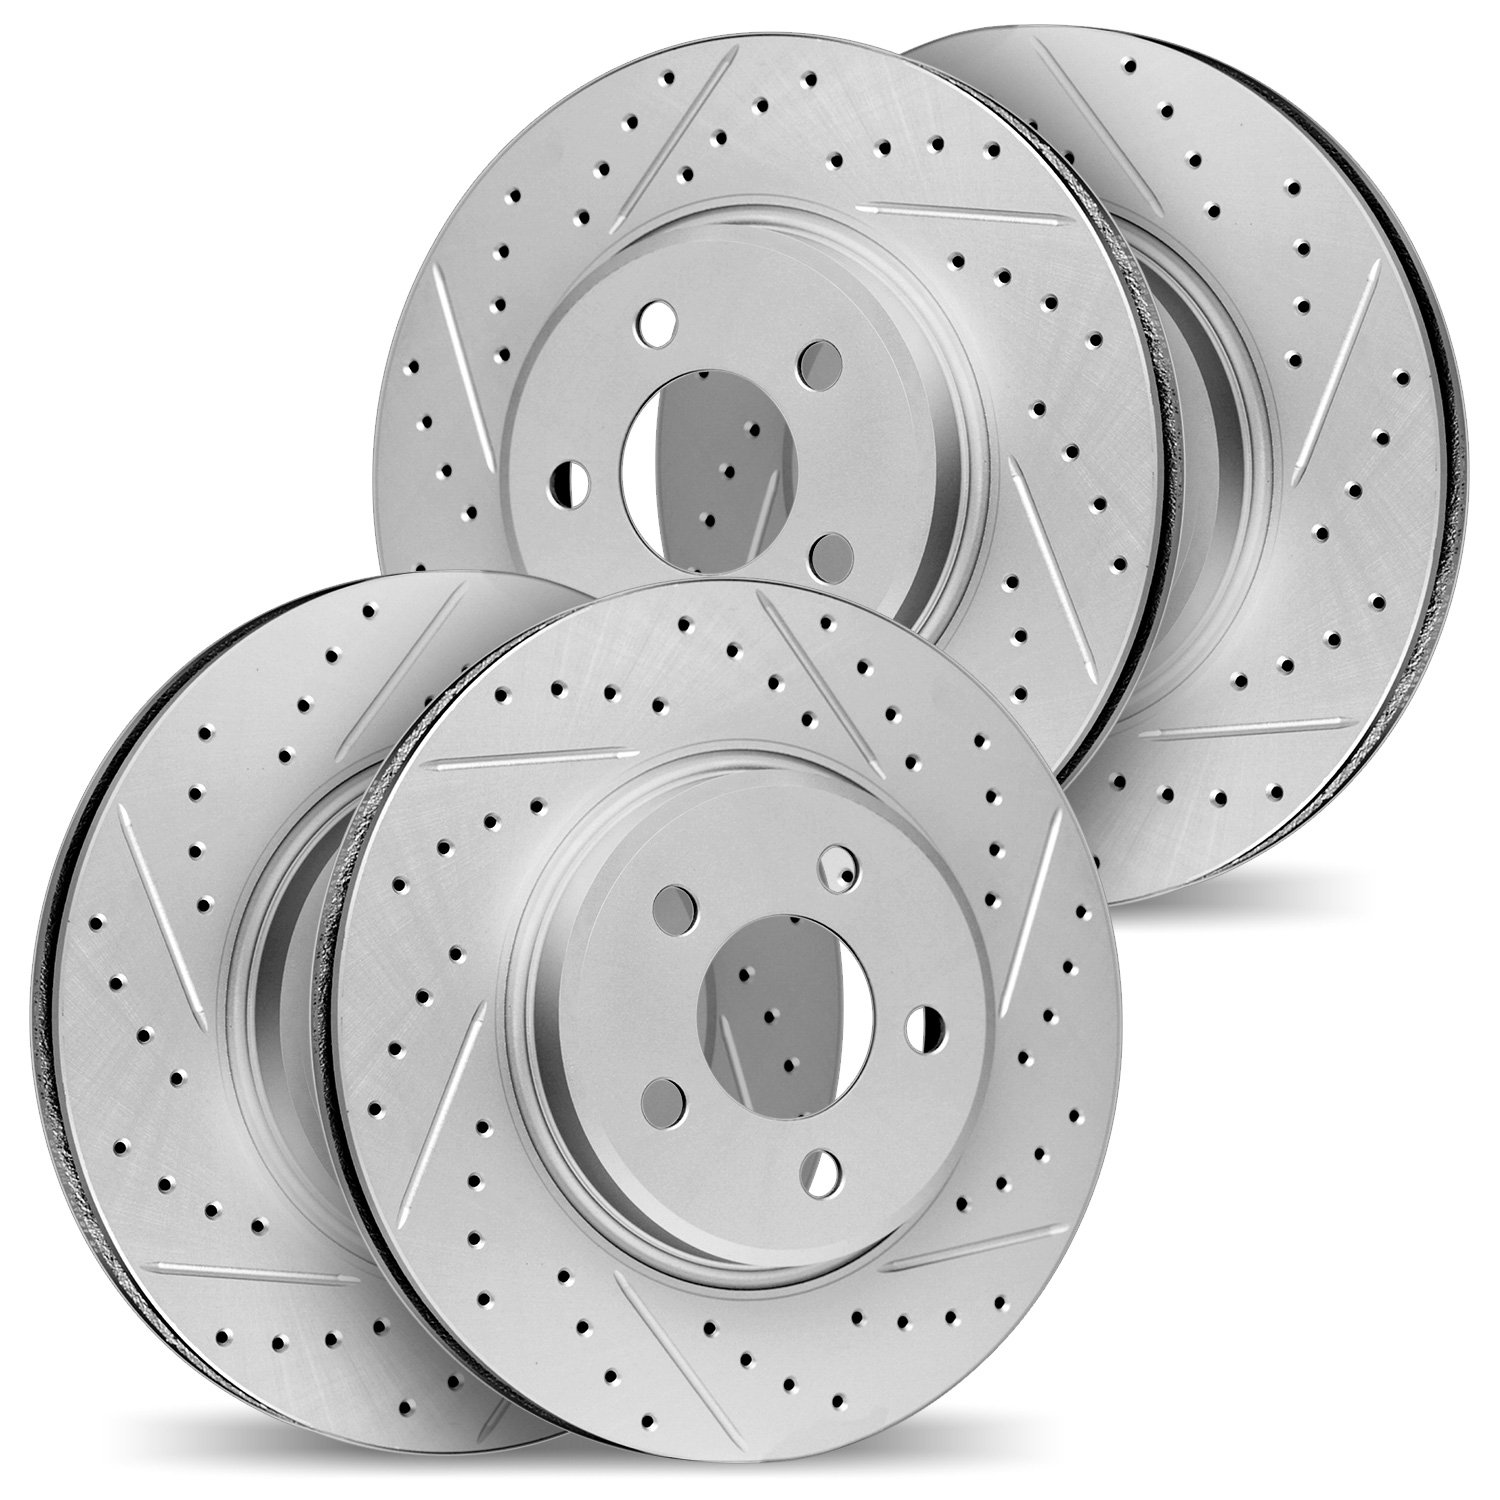 2004-67022 Geoperformance Drilled/Slotted Brake Rotors, 1989-1996 Infiniti/Nissan, Position: Front and Rear